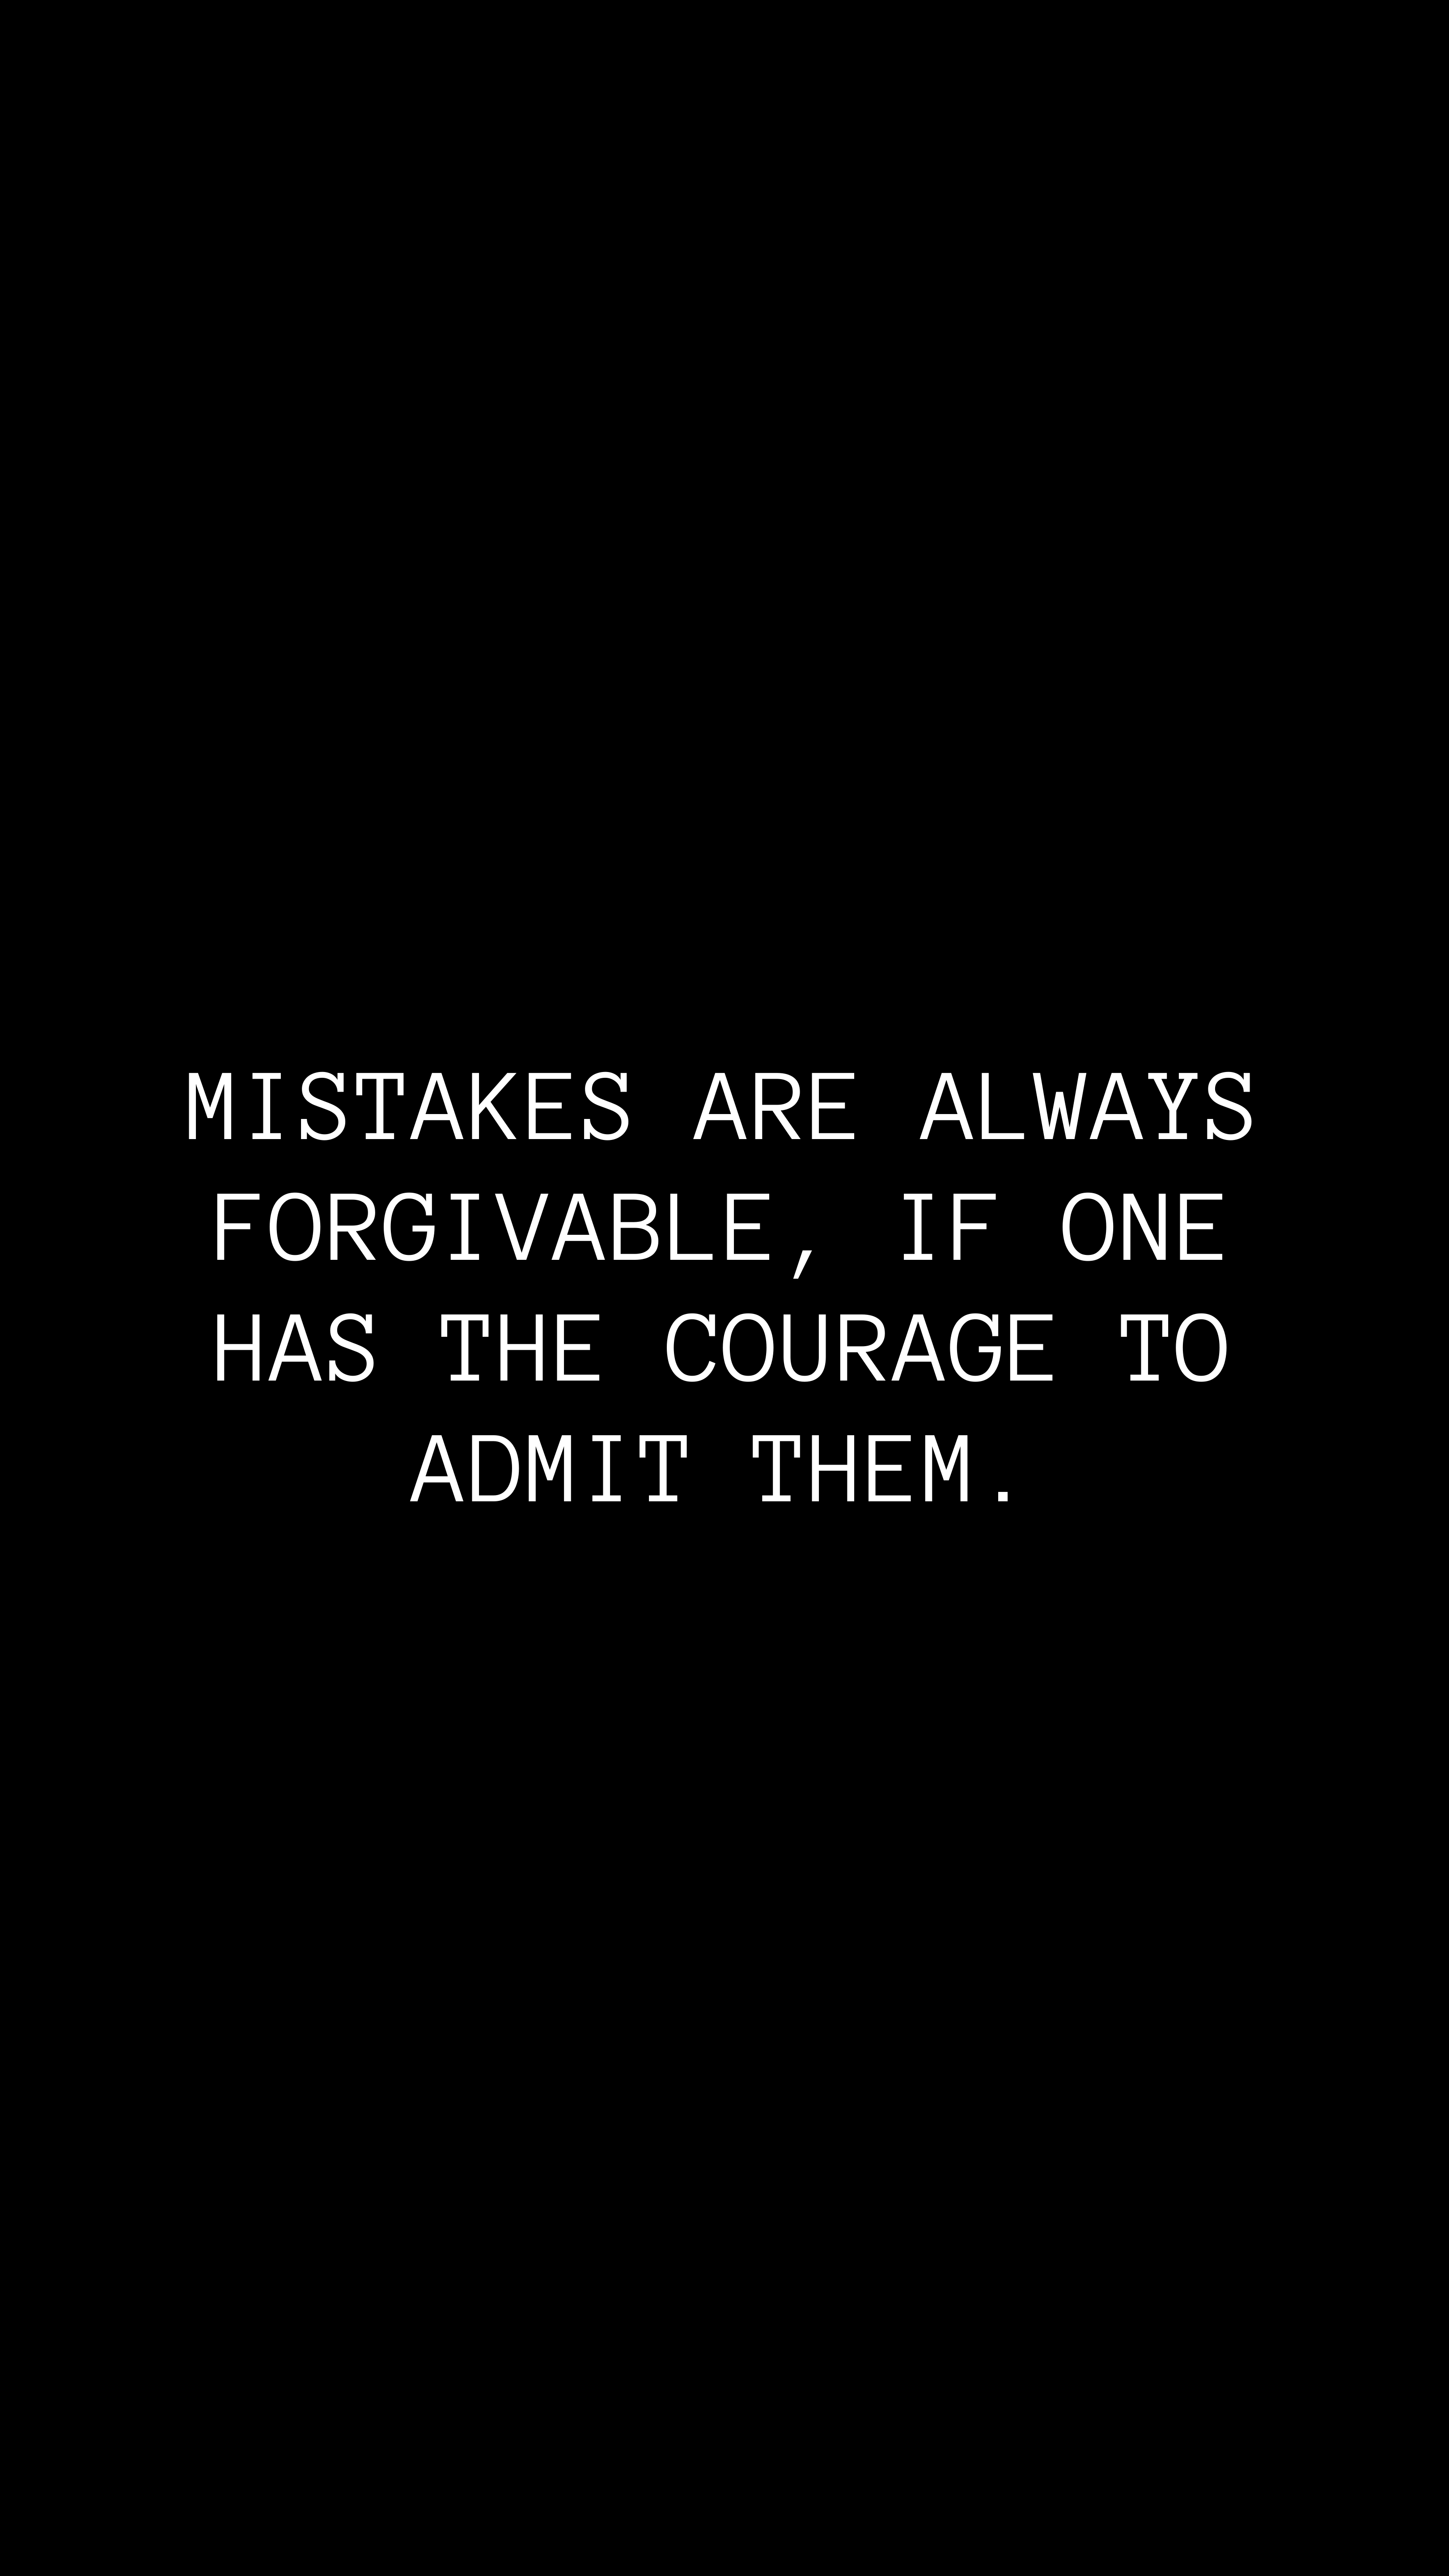 quote, phrase, quotation, words, utterance, errors, courage HD wallpaper